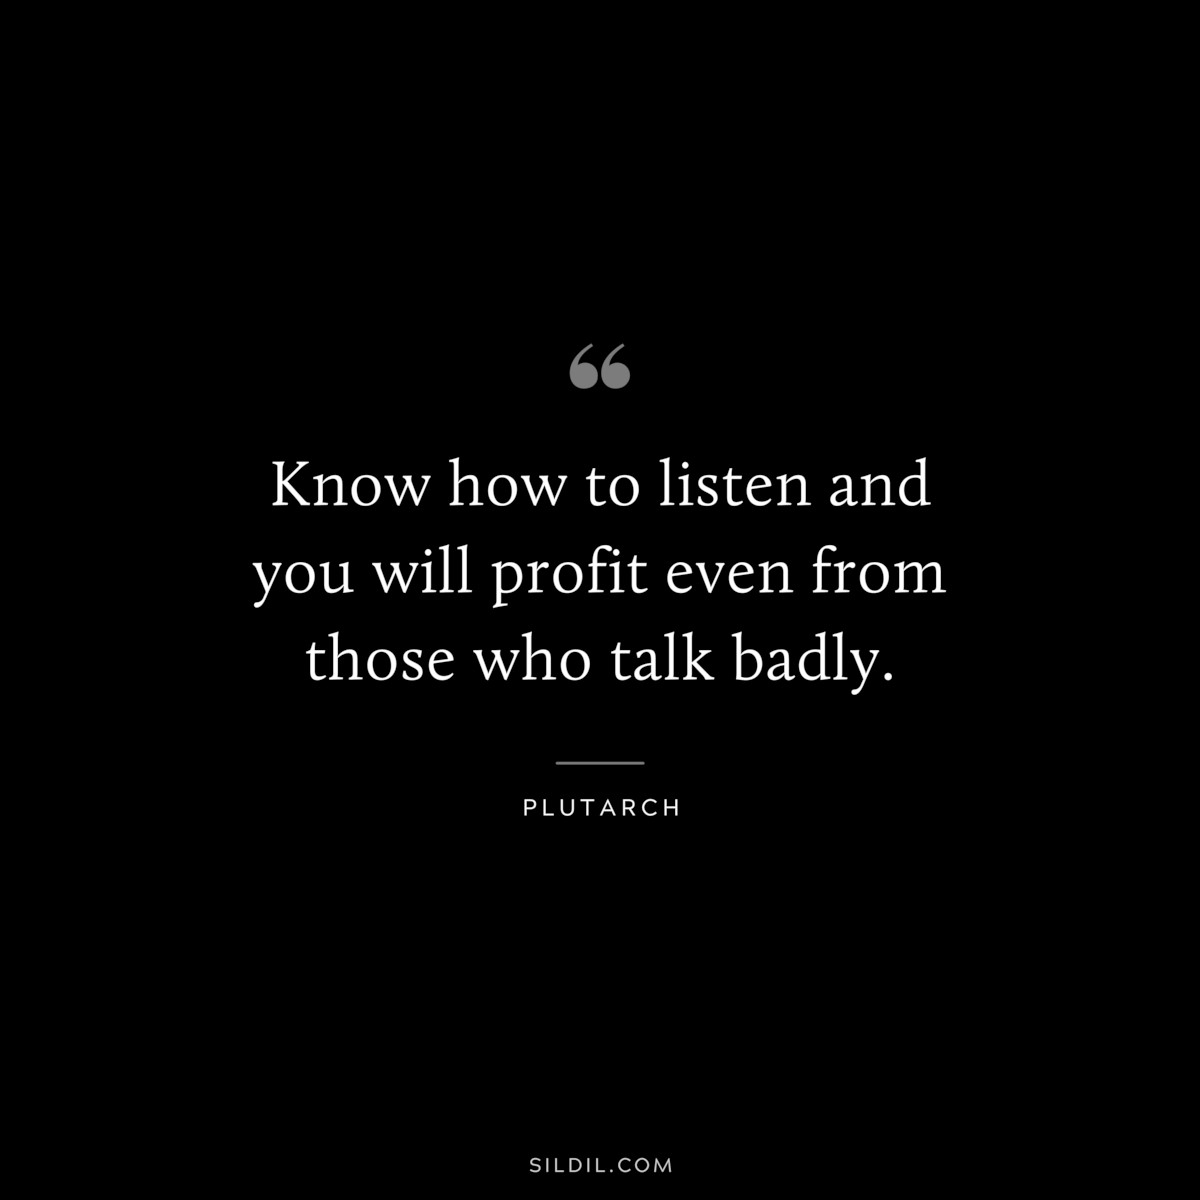 Know how to listen and you will profit even from those who talk badly. ― Plutarch